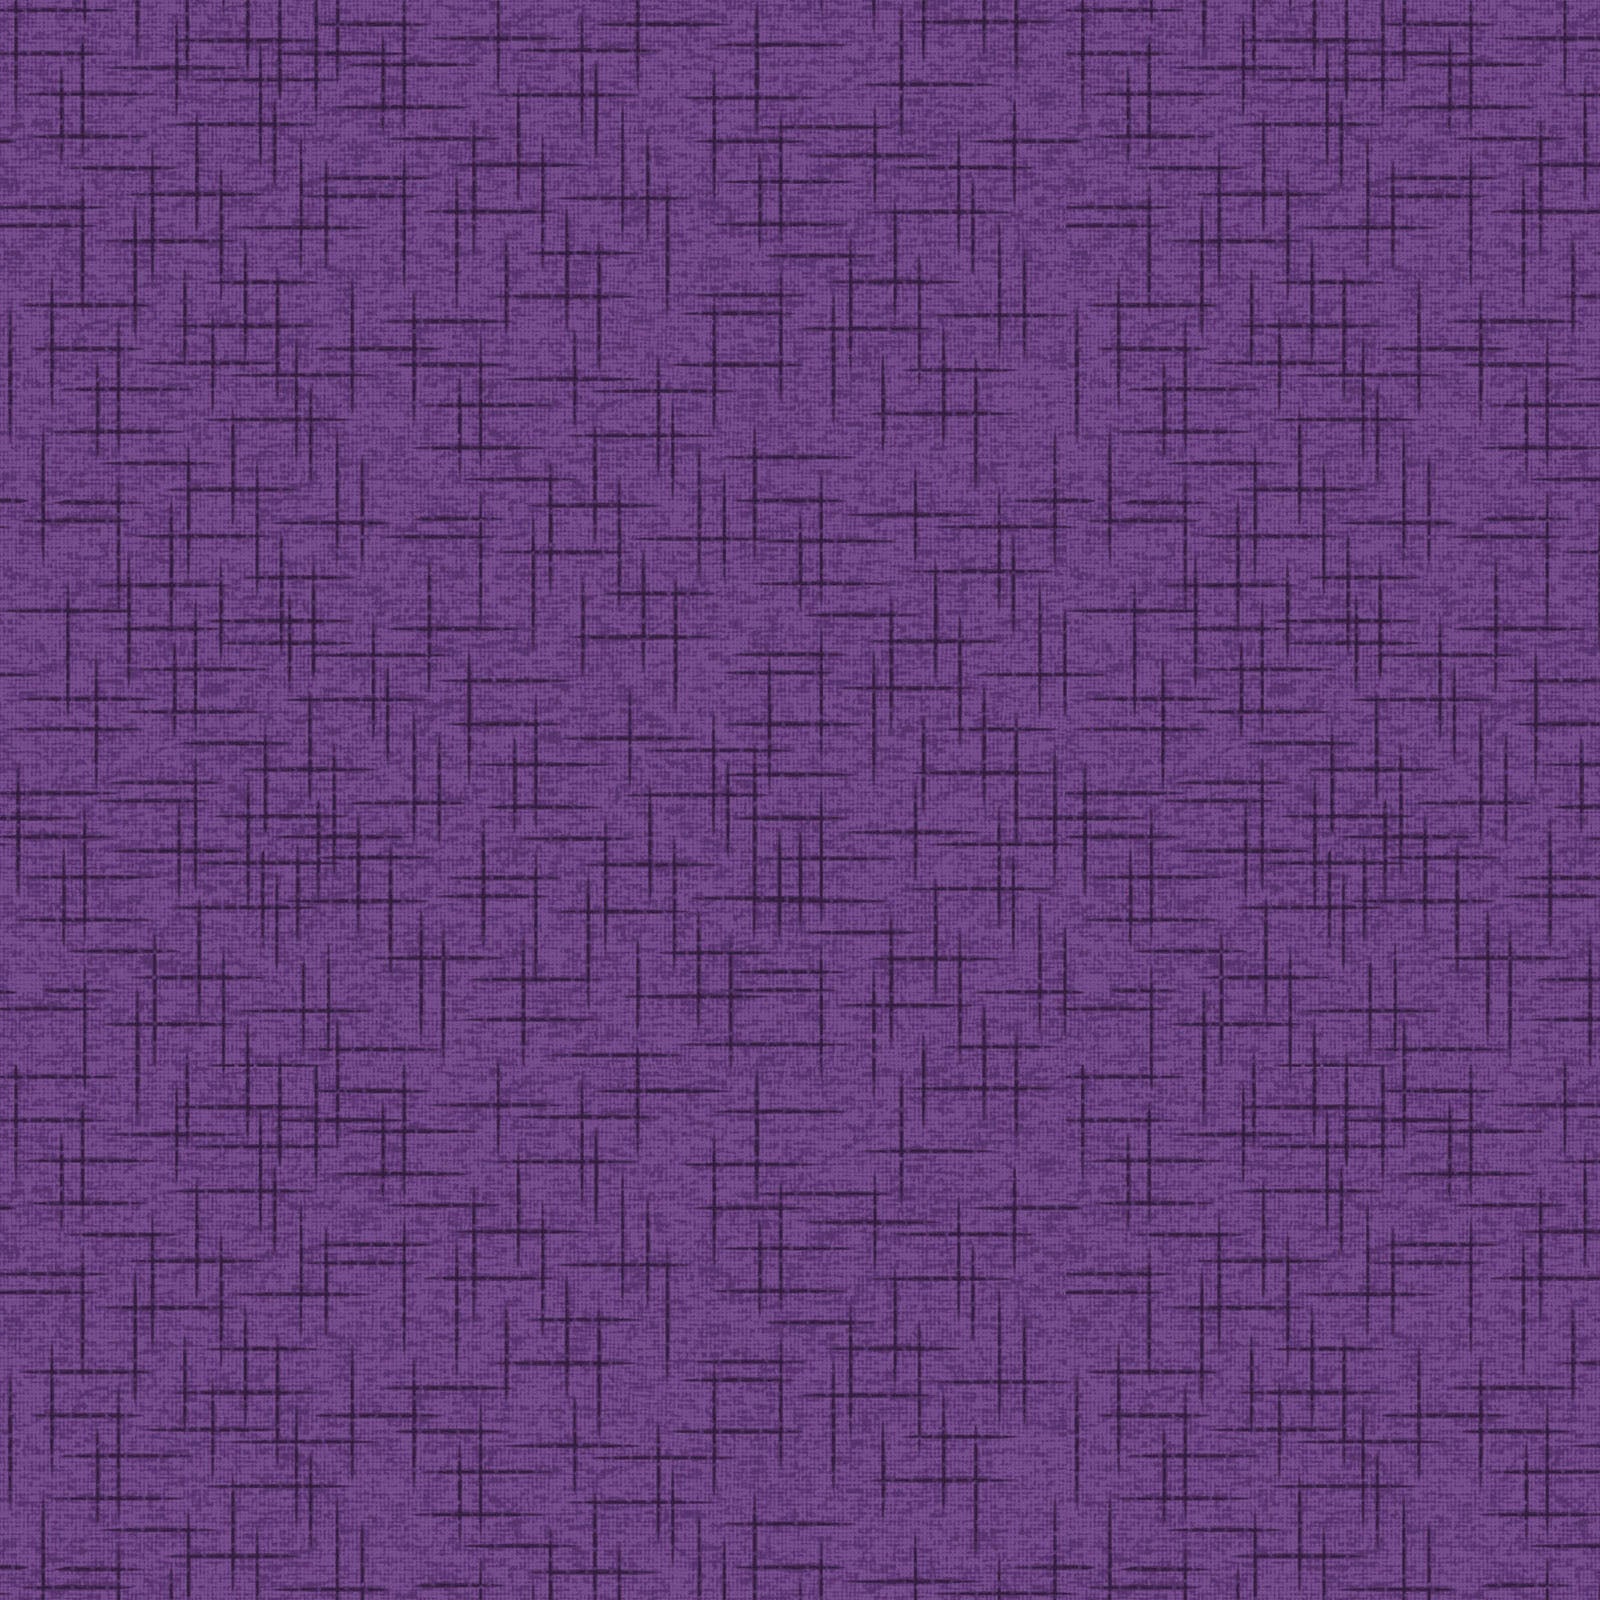 Linen texture in purple is part of the Kimberbell Basics line designed by Kim Christopherson for Maywood Studio. This fabric features purple tone on tone linen texture, making it the perfect blender to use in any quilting project, as a rich color for an applique or embroidery project, or as a border or binding to bring deep color.